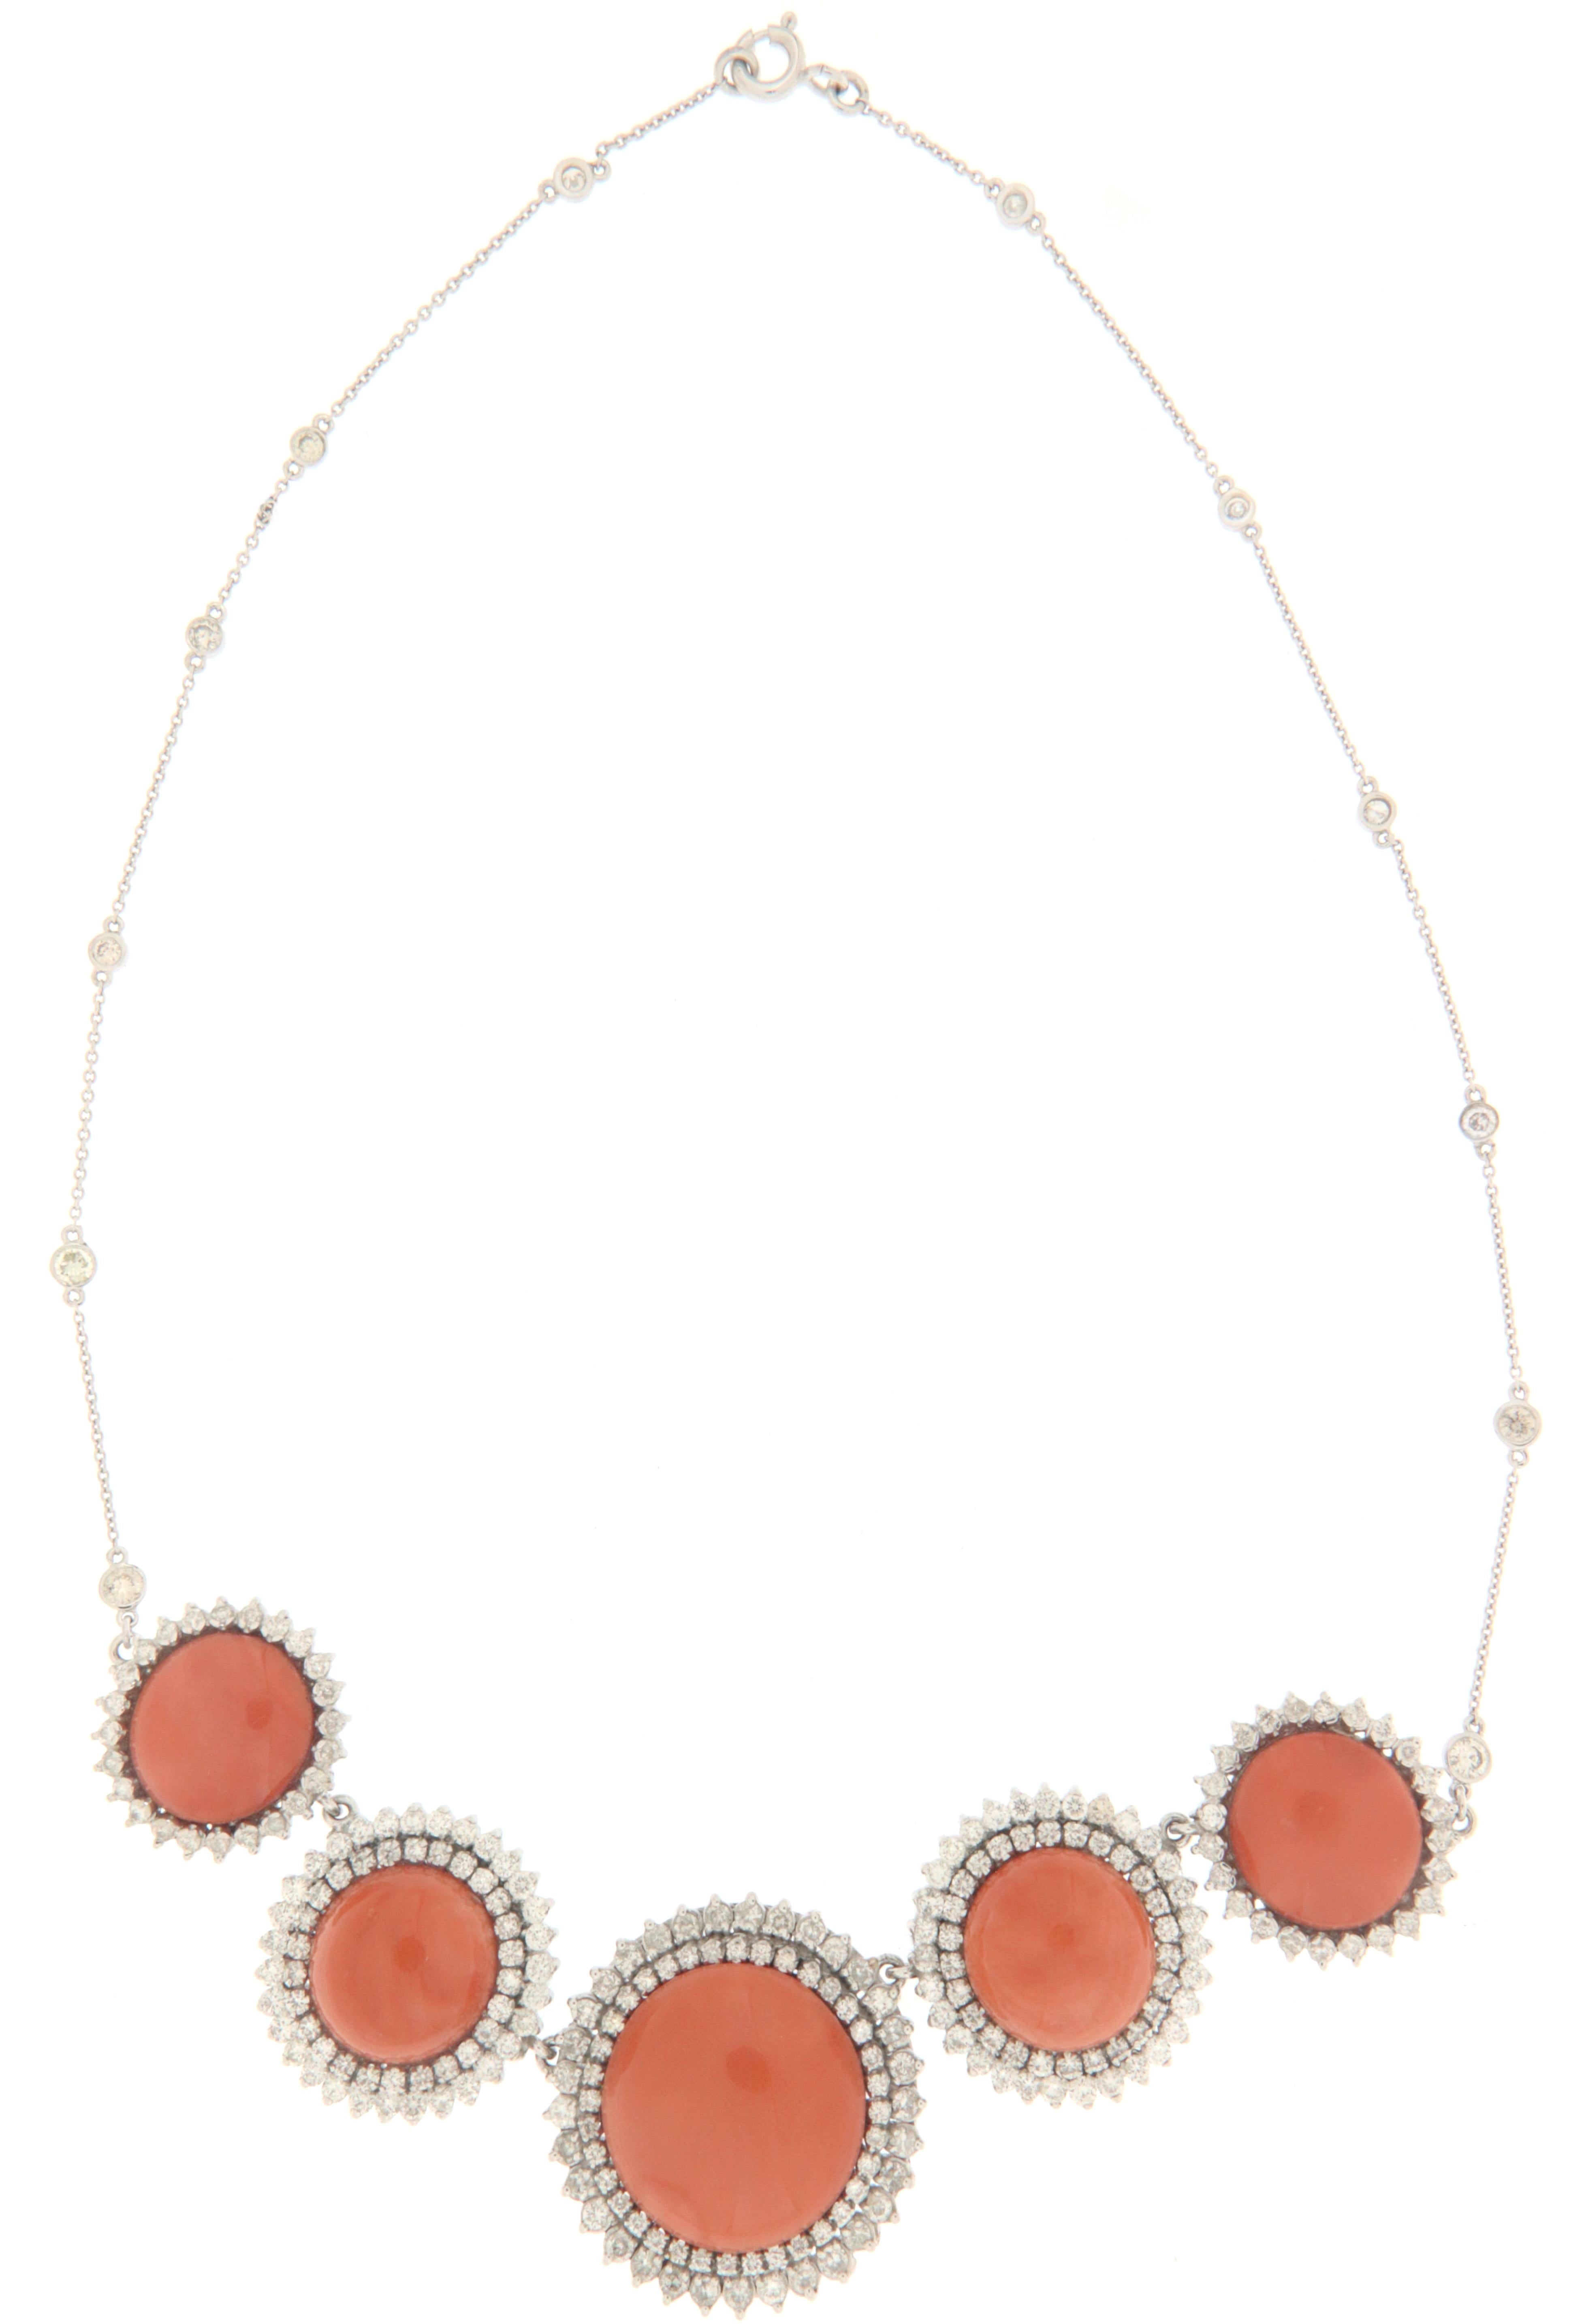 Delicate necklace made entirely by hand by artisans in southern Italy composed in 18-karat white gold, natural diamonds and natural corals that enrich the design.
A simple jewel to use in any circumstance, delicate to the touch, suitable for the